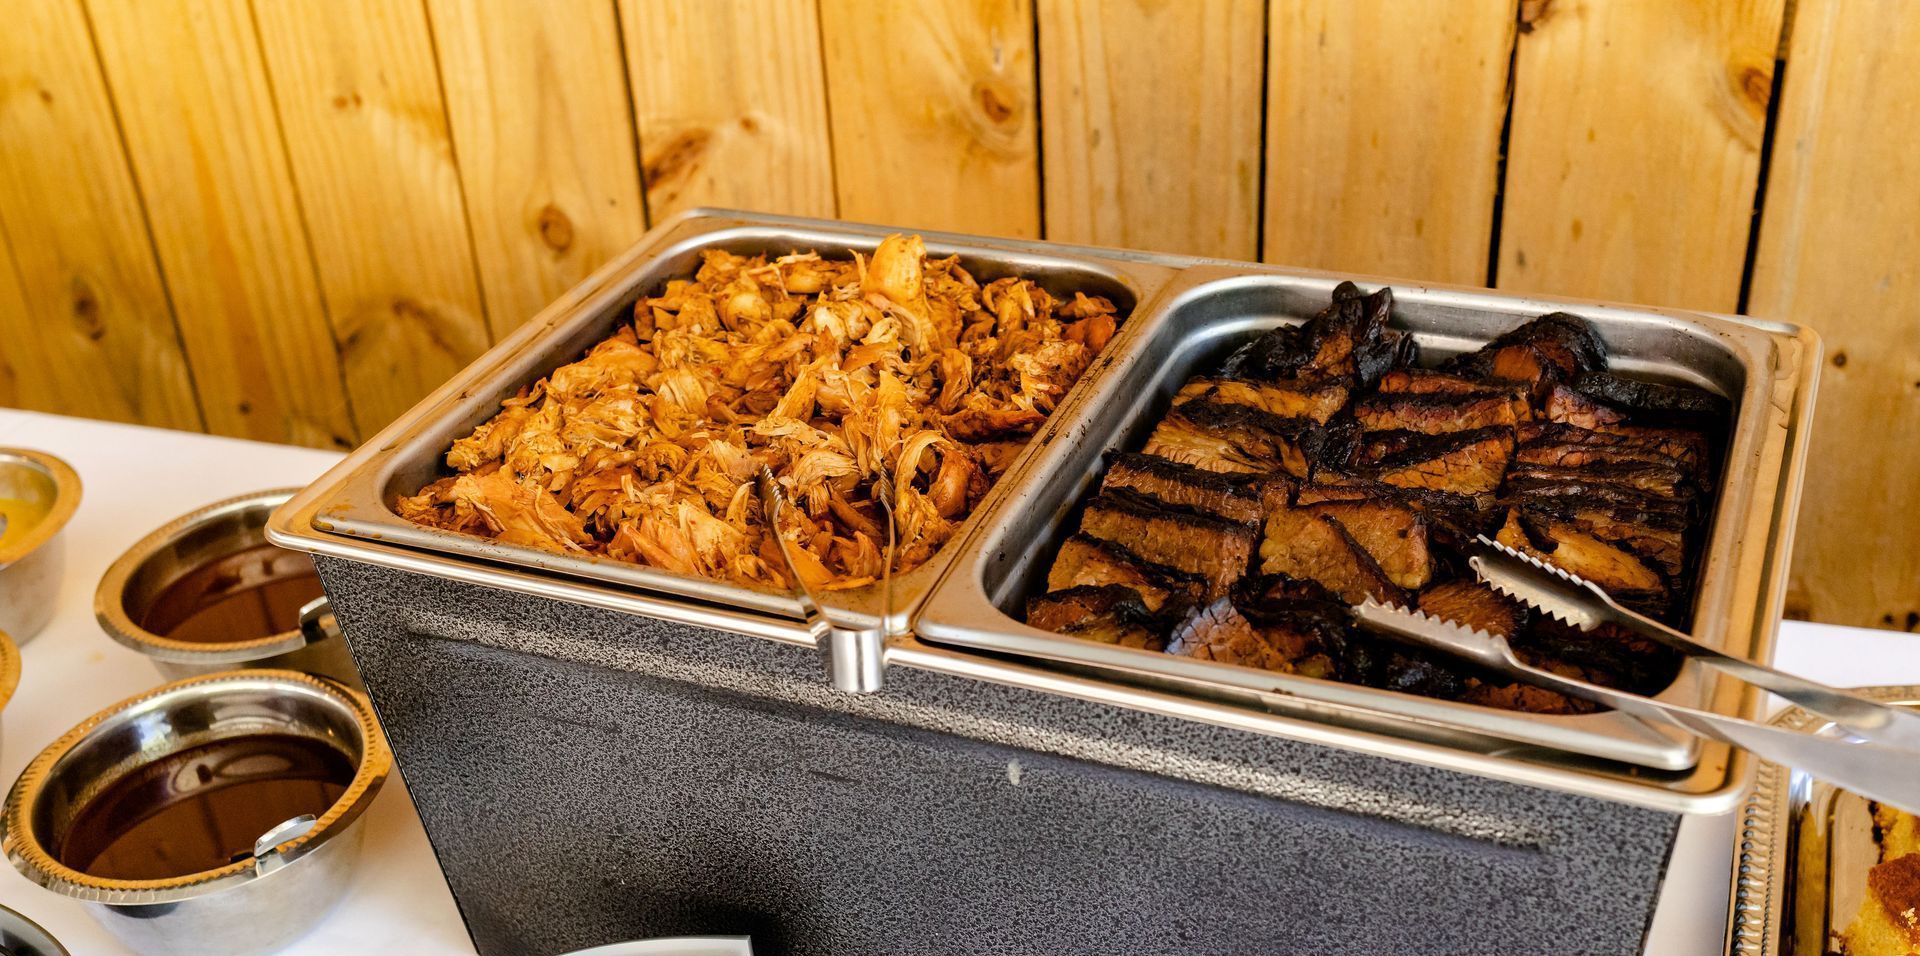 Tailgating and Game Day Catering Packages: Bringing the Best for Your Guests